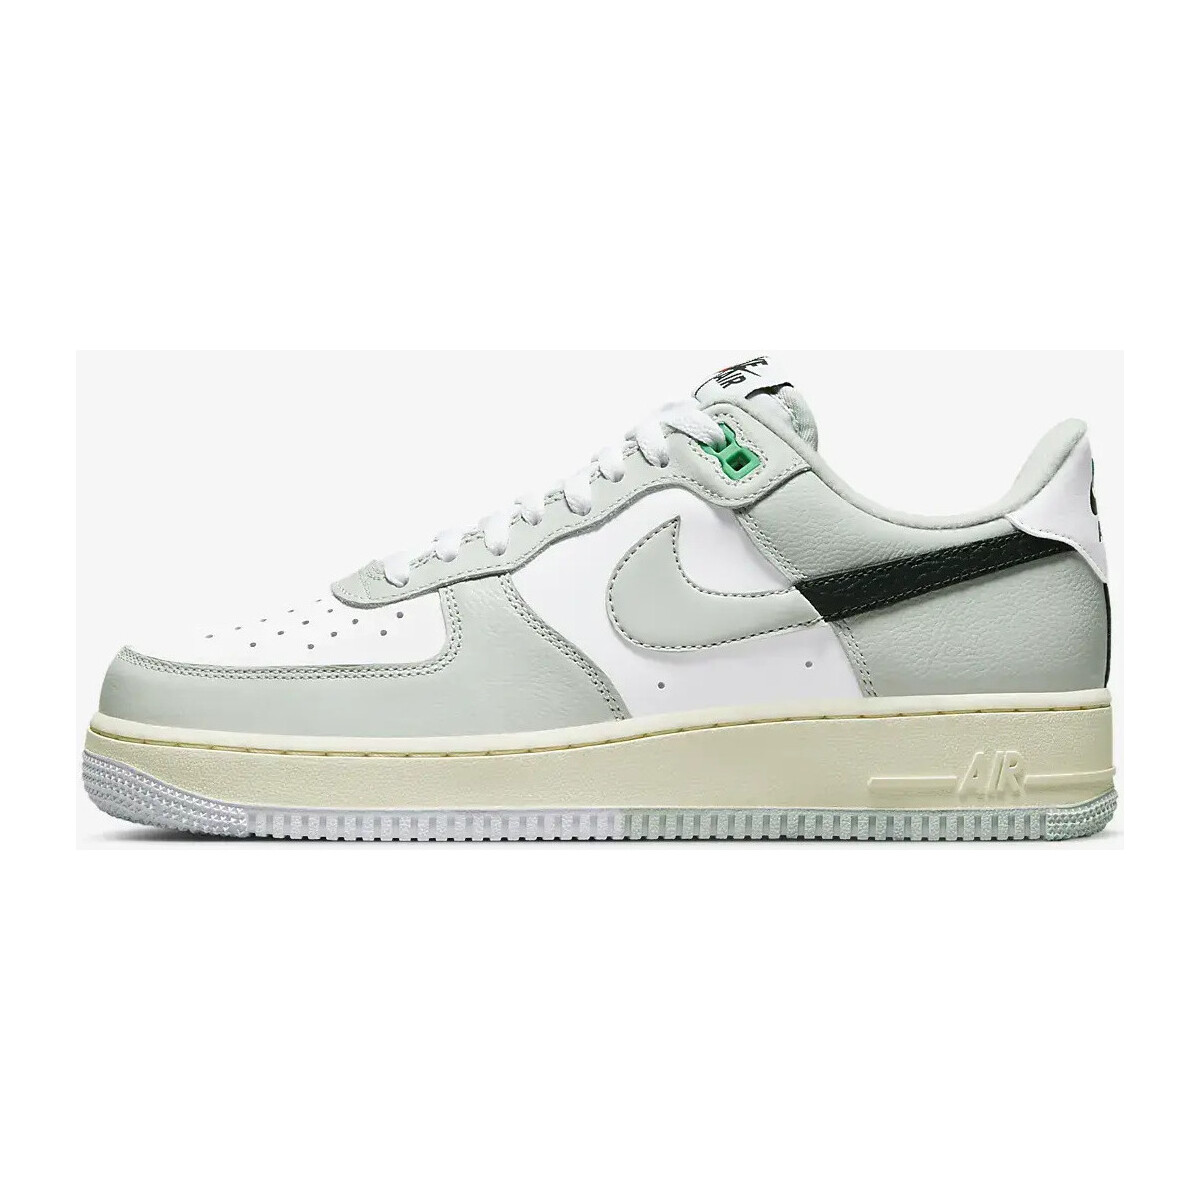 Nike Gris AIR FORCE 1 07 LV8 0HzVXIms